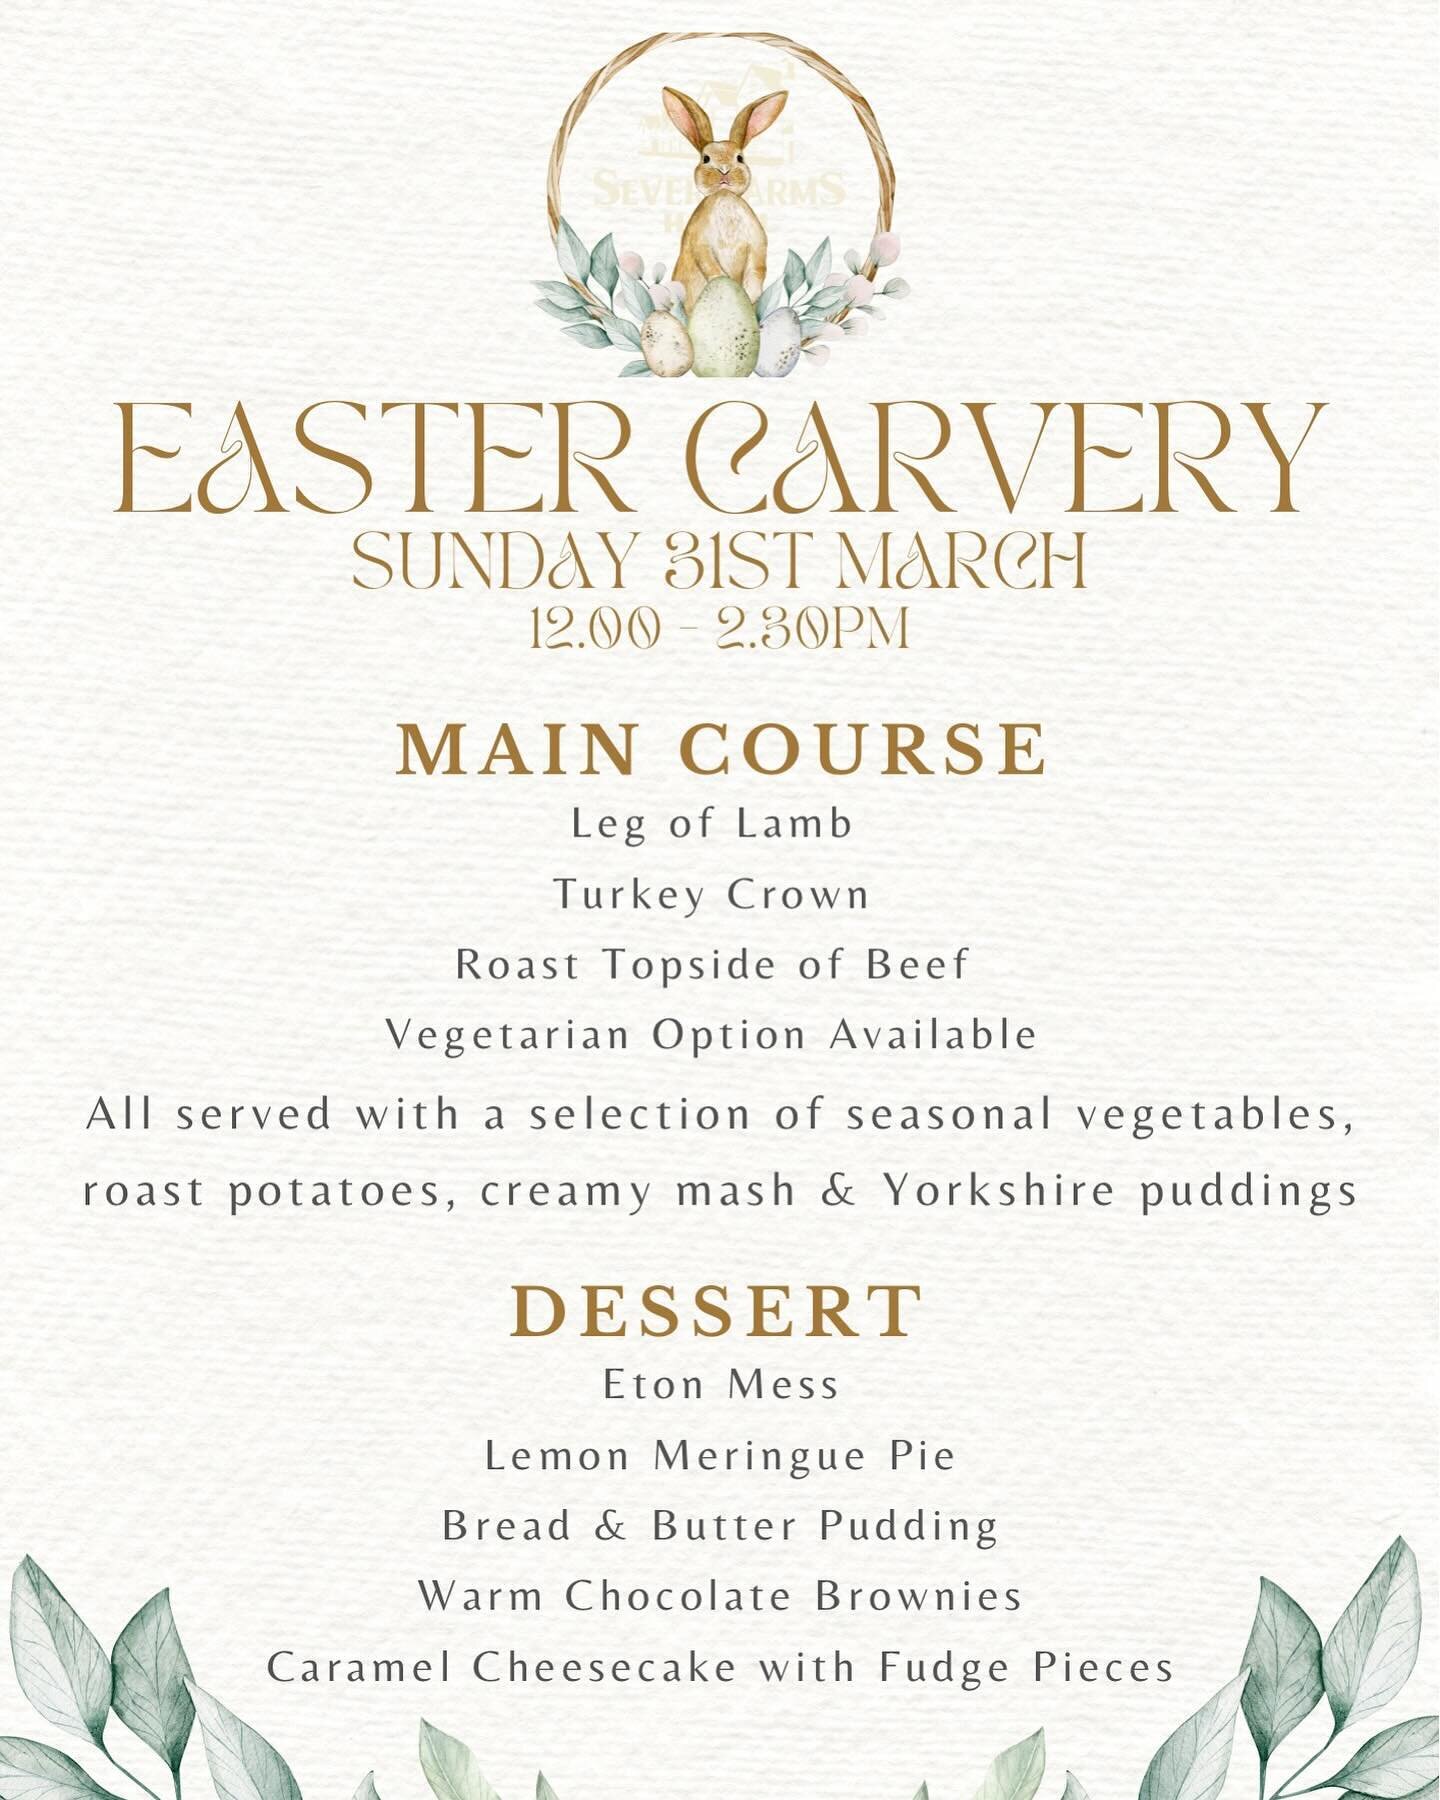 🐣 Easter Carvery 🐣 

🗓️Sunday 31st March 🗓️
🕛 12.00pm - 2.30pm 🕑

Pre-booking required.

All of our bookings are taken over the phone, please call the number below to book your table.

📞 01597 851224 📞 

📍Severn Arms Hotel, LD1 5UA.